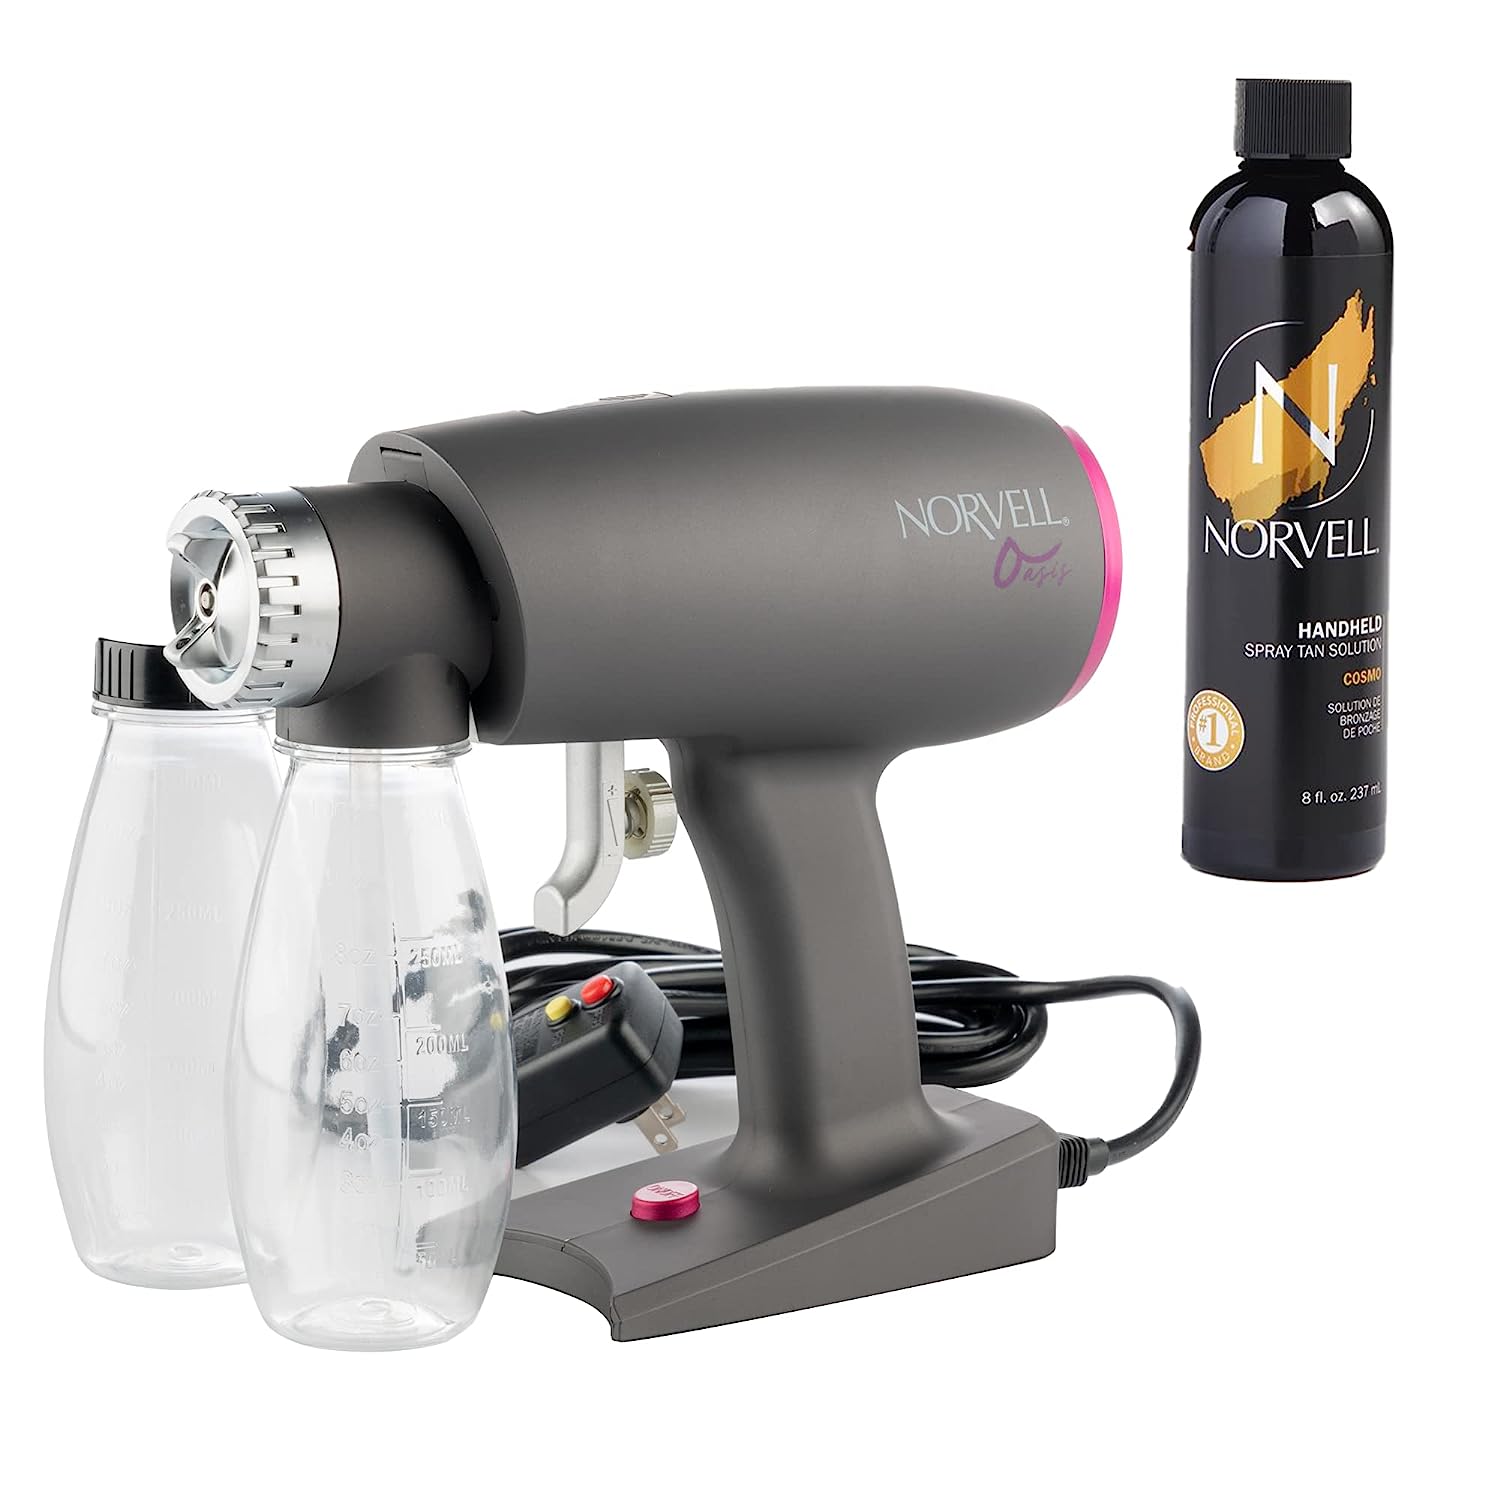 Oasis Spray Tan Machine Kit with Norvell Cosmo [...]